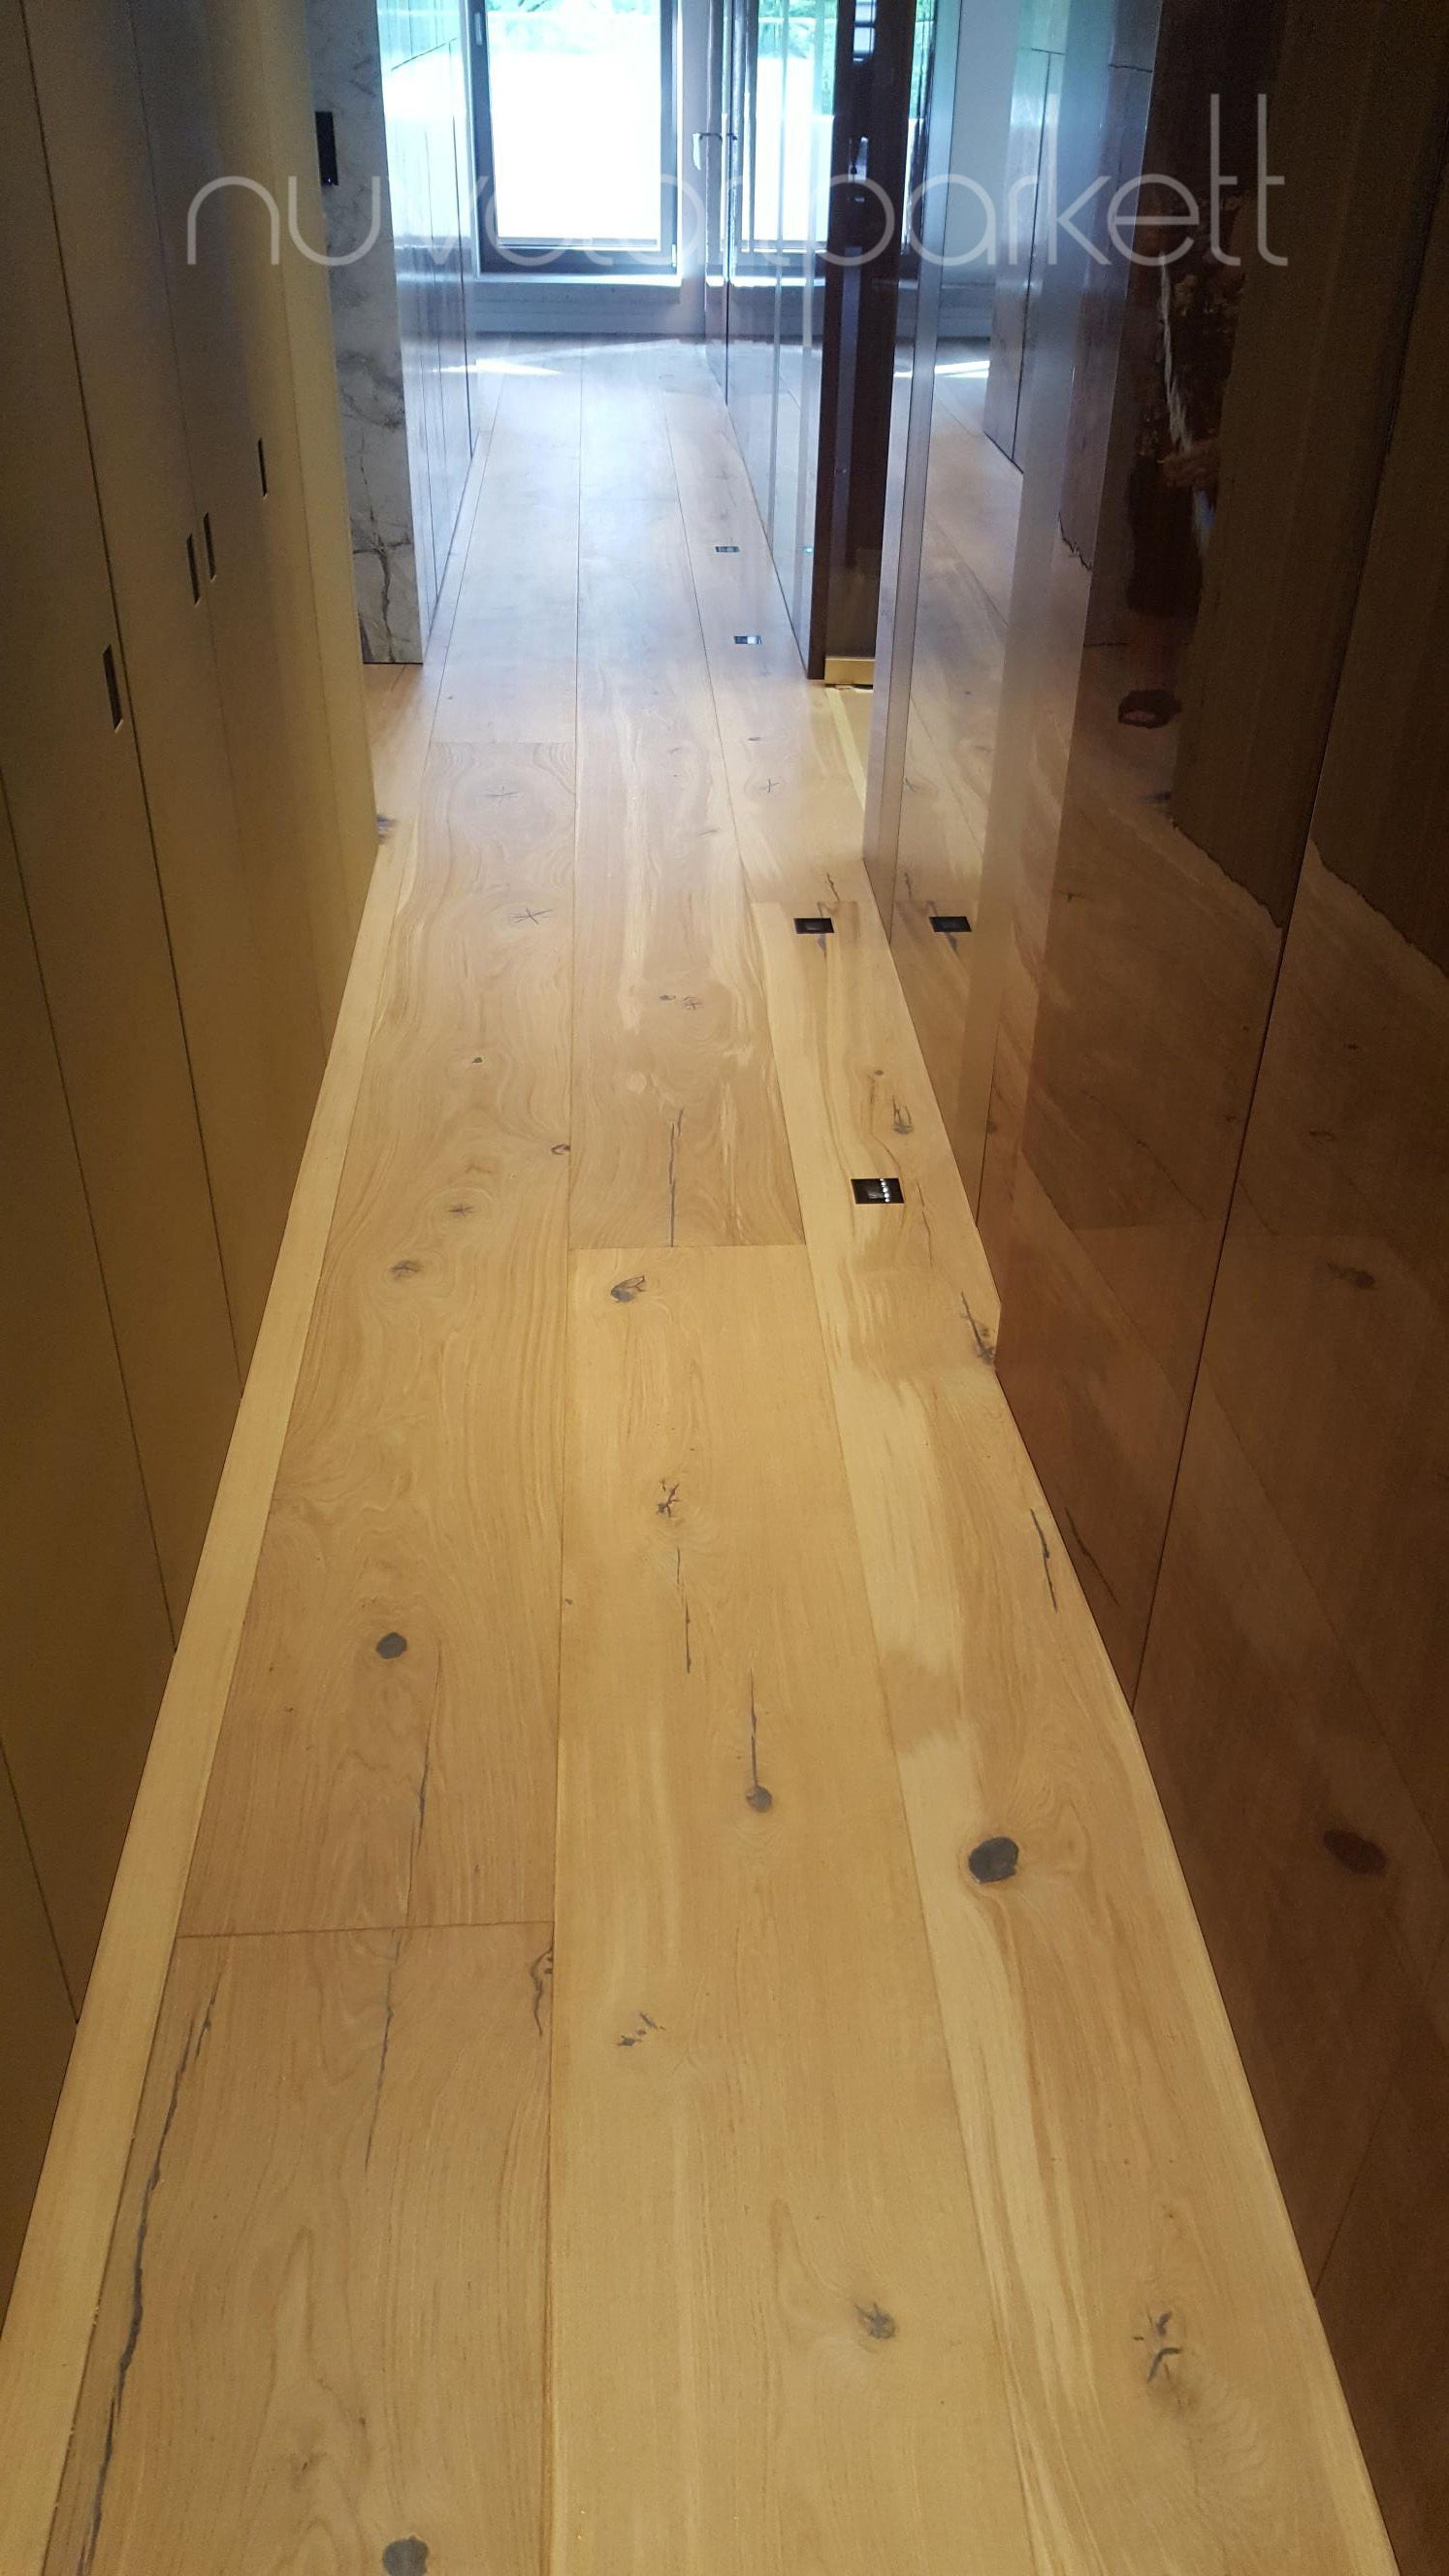 10 Lovable Hardwood Flooring Perth 2024 free download hardwood flooring perth of nuvolariparkett robert widerski on pinterest intended for df0d9f58ce562f491951d006df37e099